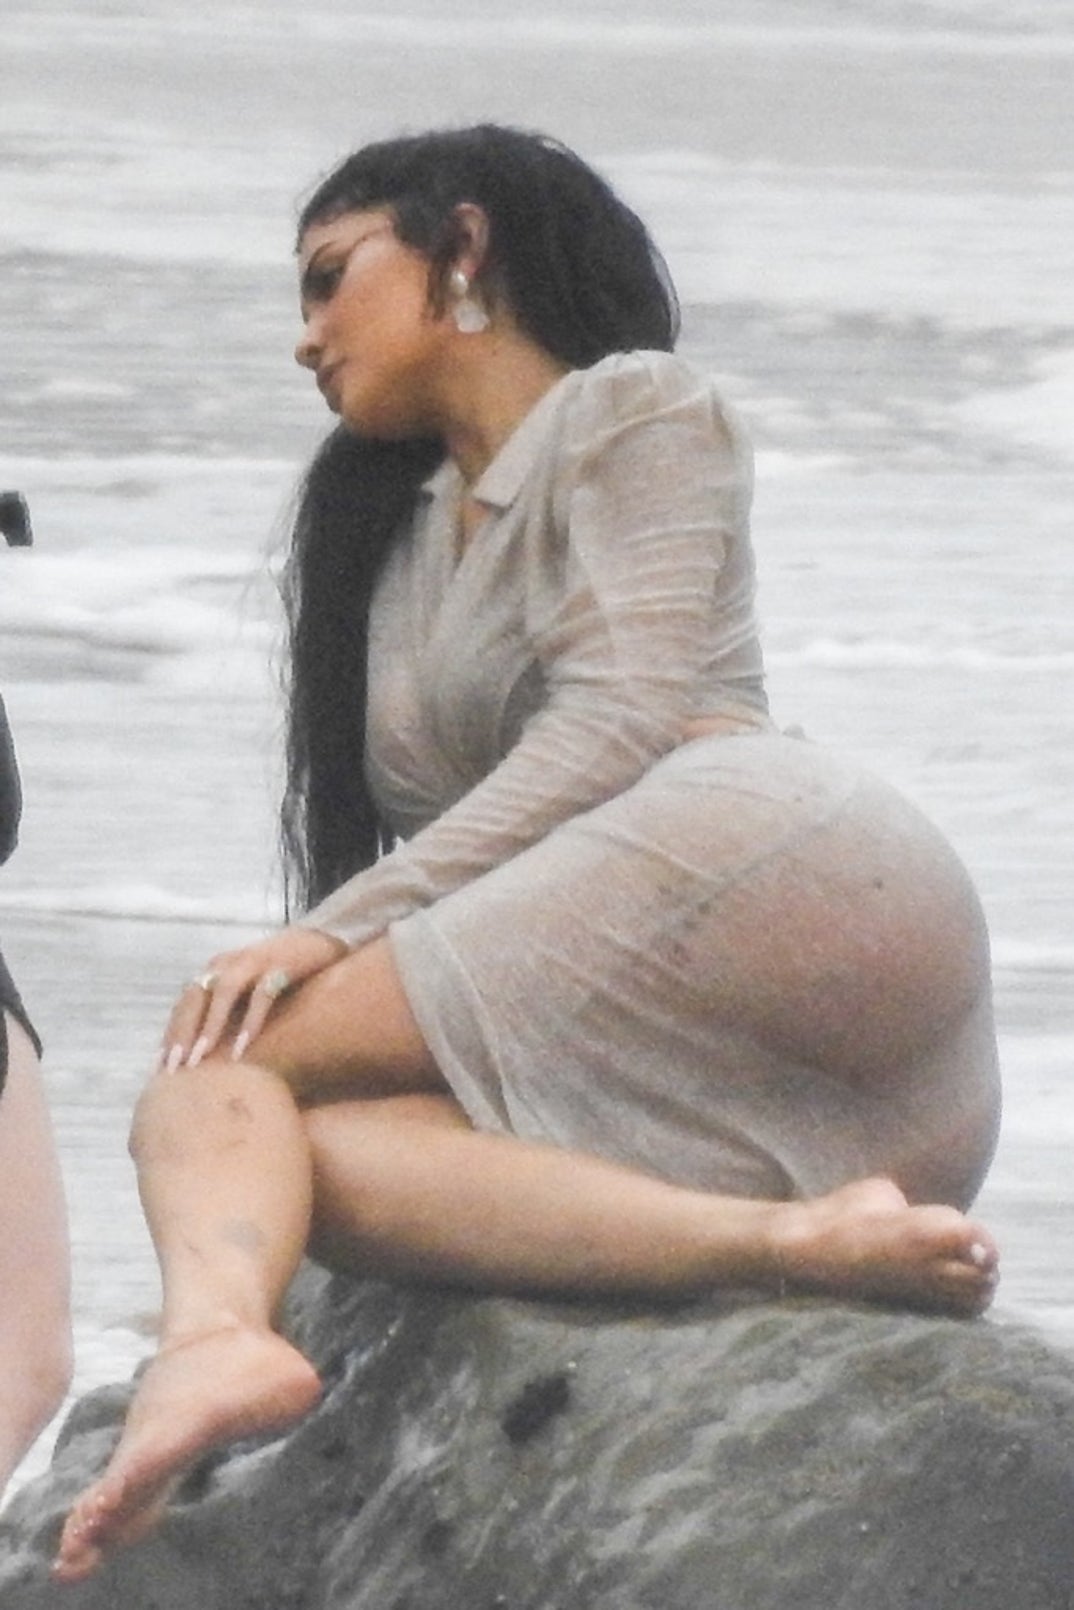 Kylie Jenner's Sєxy See-Through Shoot in Malibu